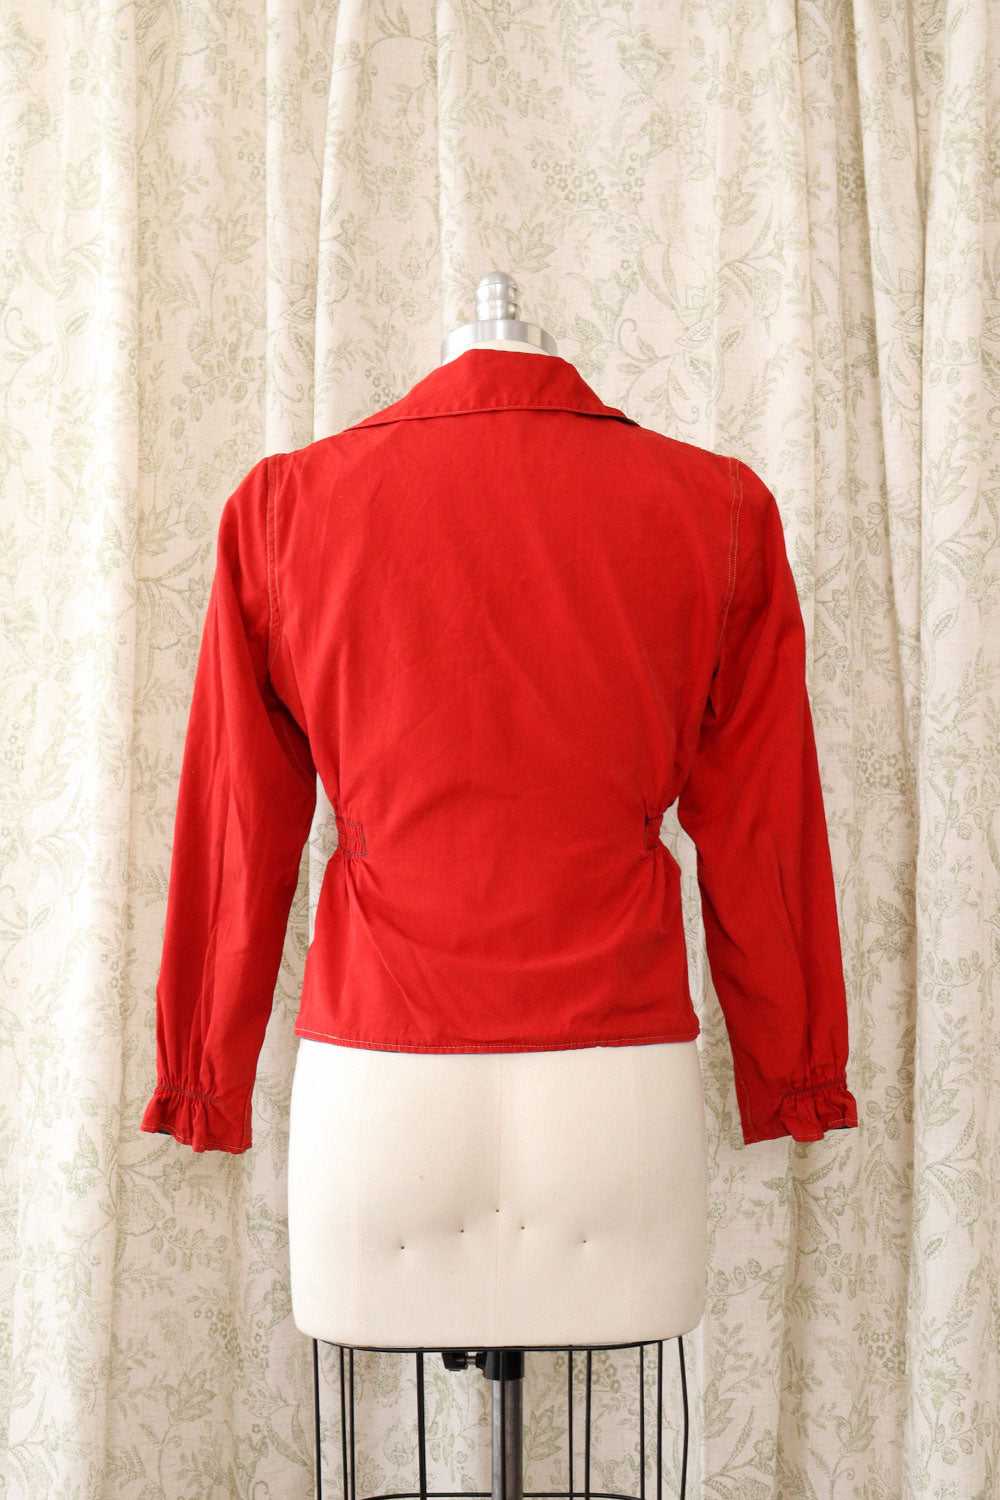 Reversible Red/Green Cropped Jacket XS/S - image 6